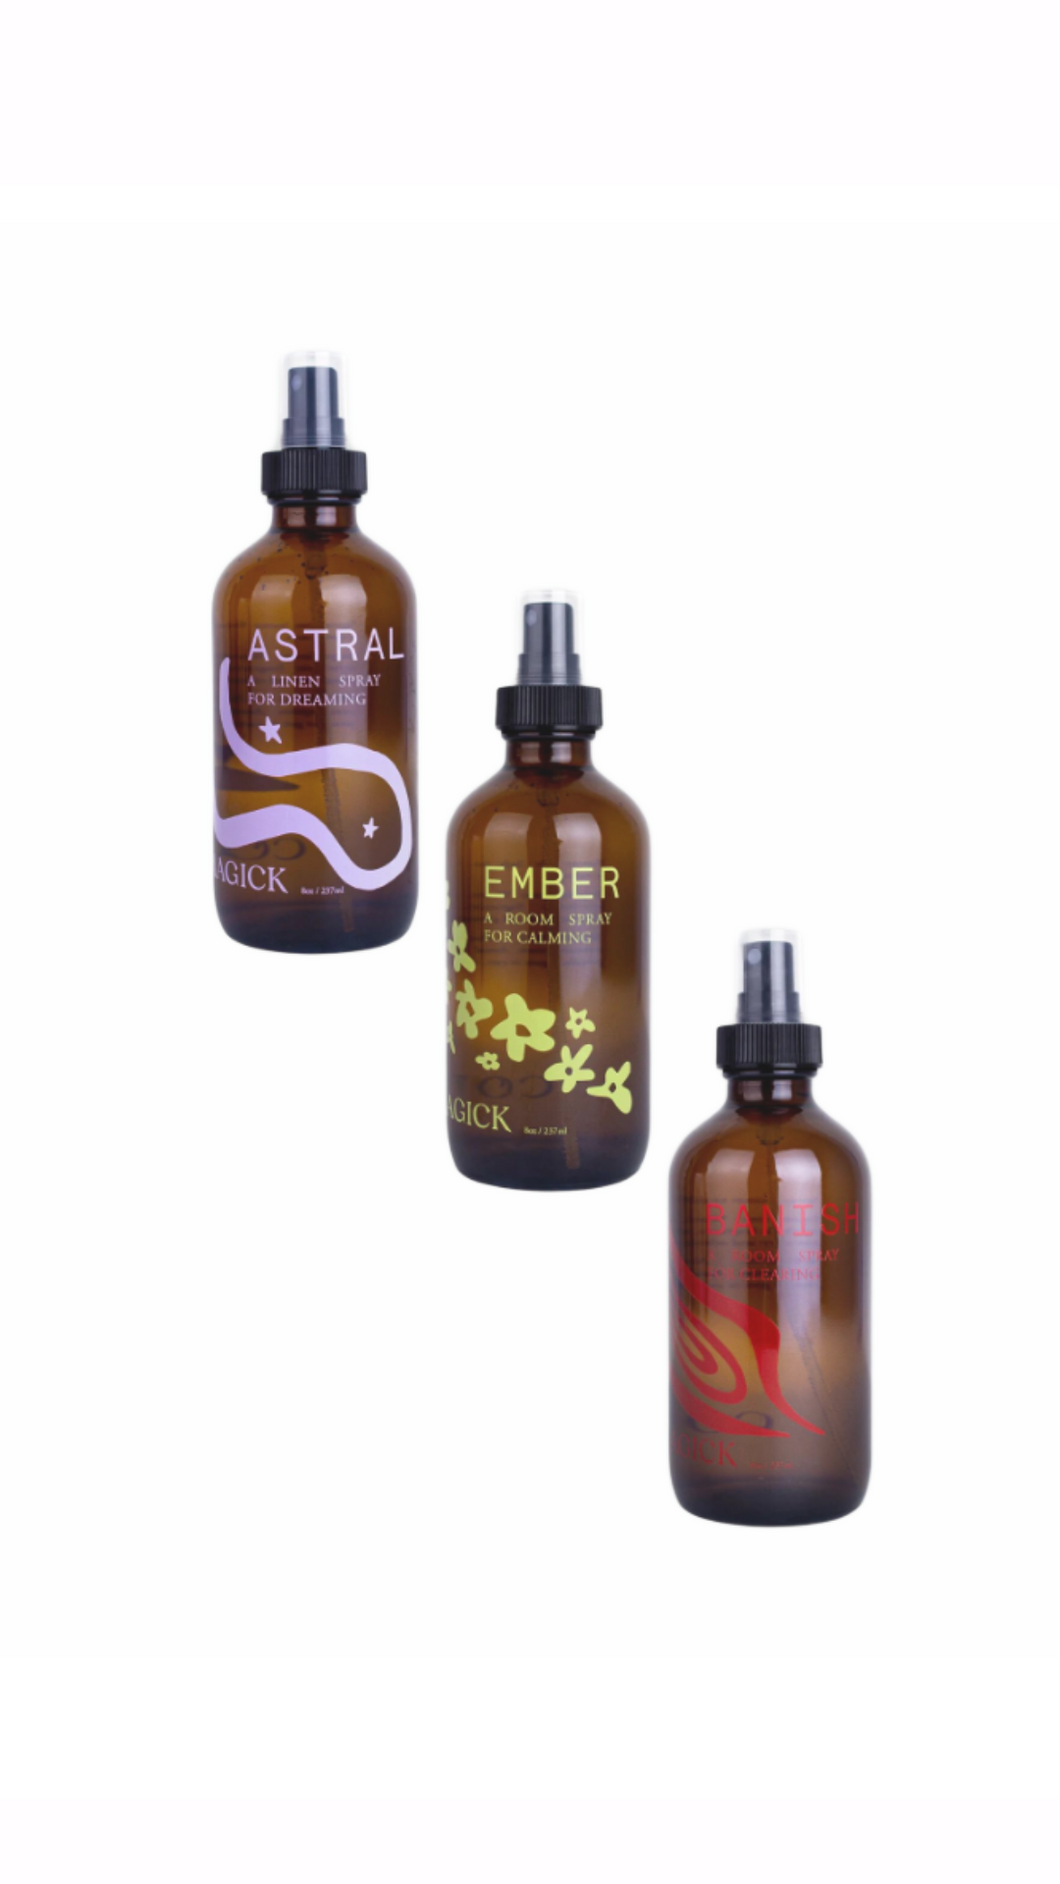 Counter magic room sprays, astral, ember and banish